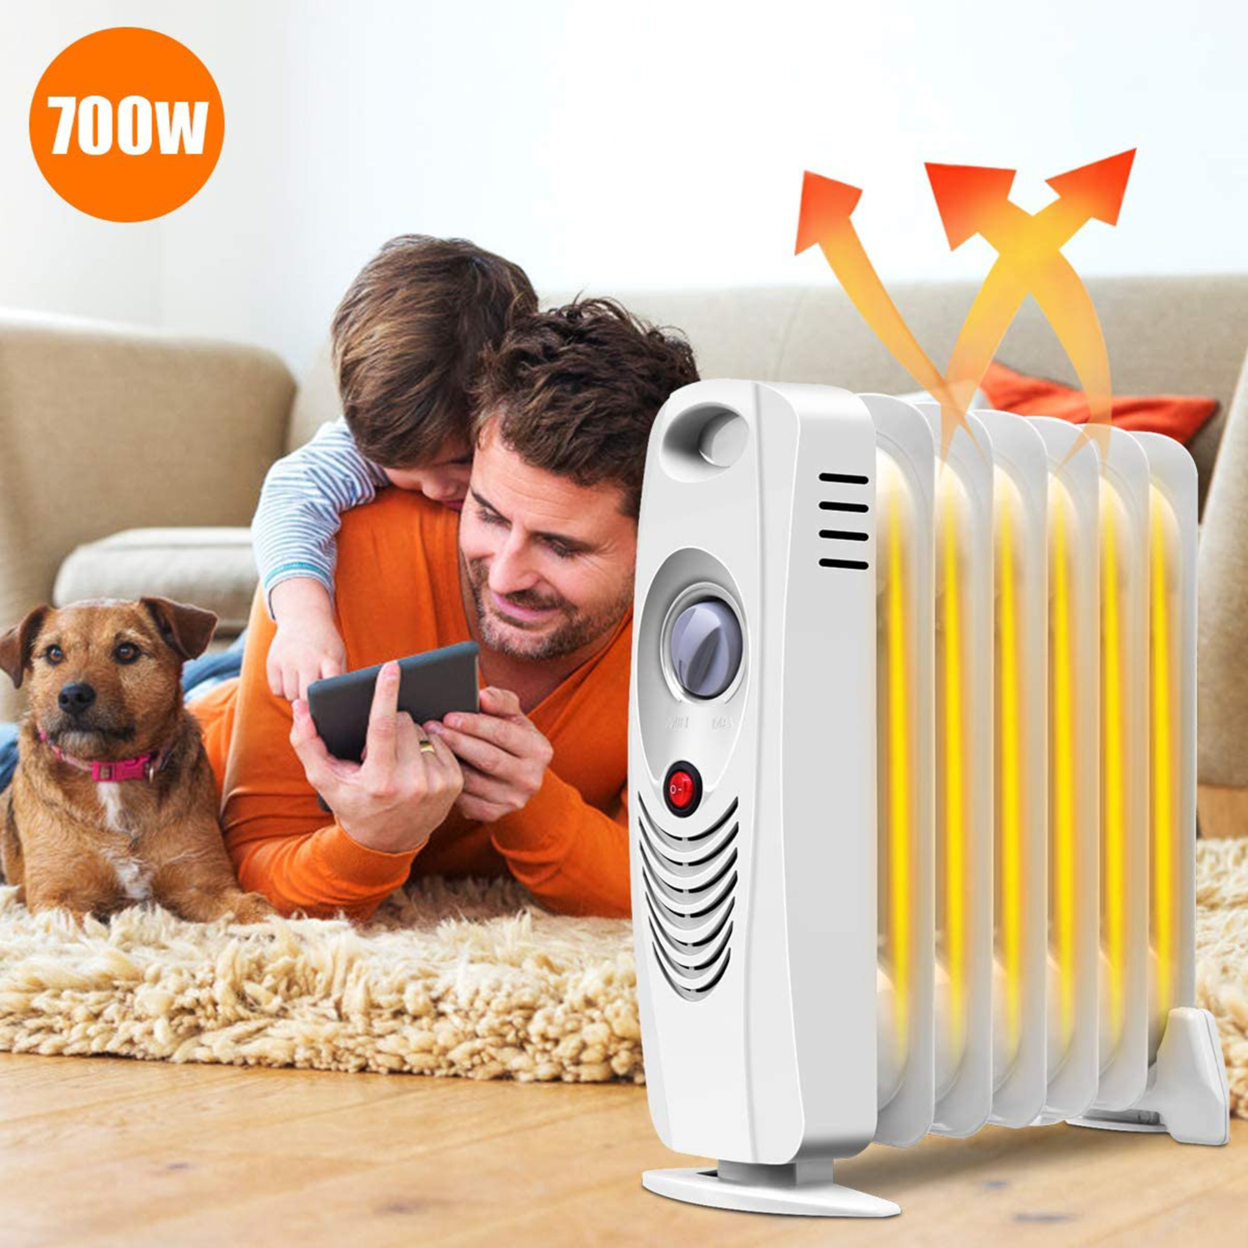 700W Oil Filled Space Heater Radiator W/ Adjustable Thermostat Home Office